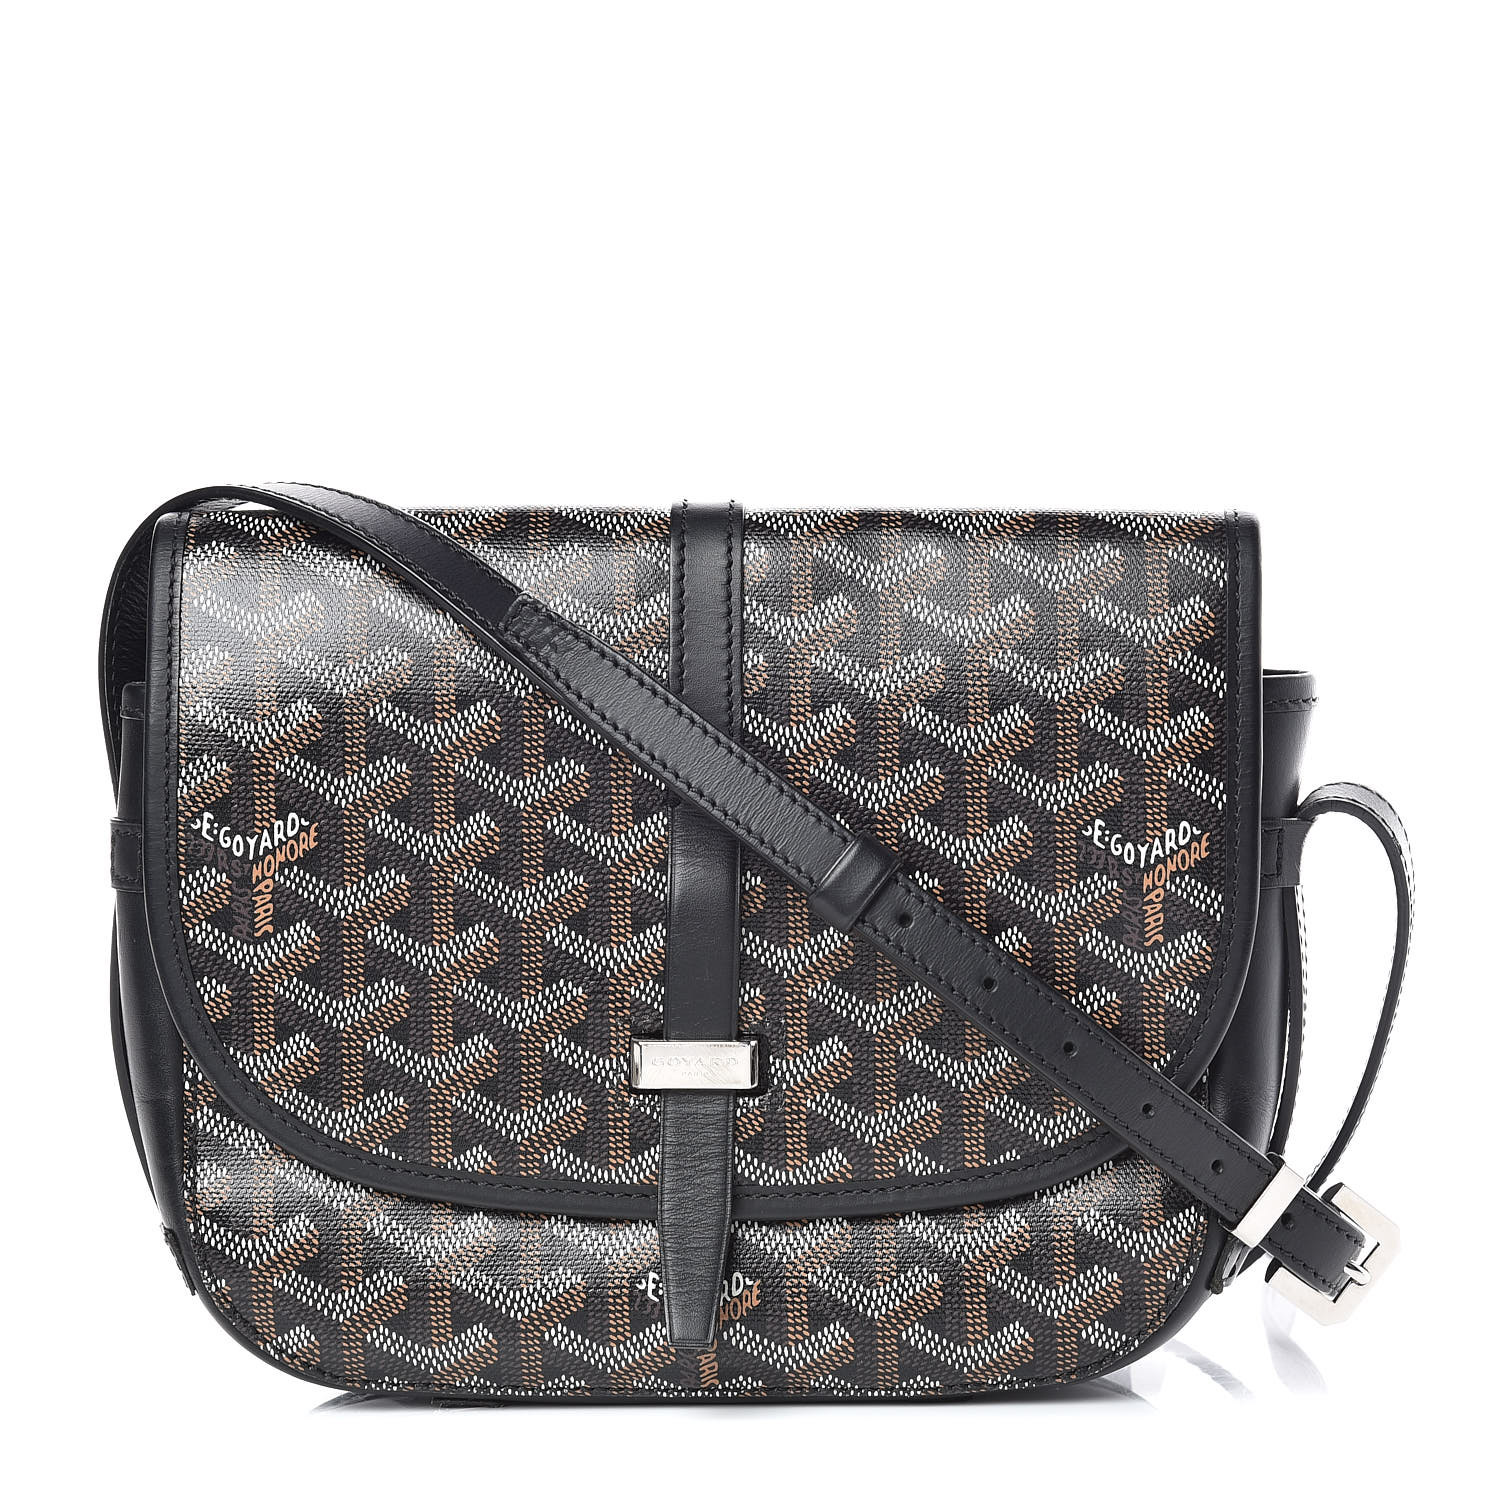 Goyard Belvedere Pm Price 2022 - How do you Price a Switches?